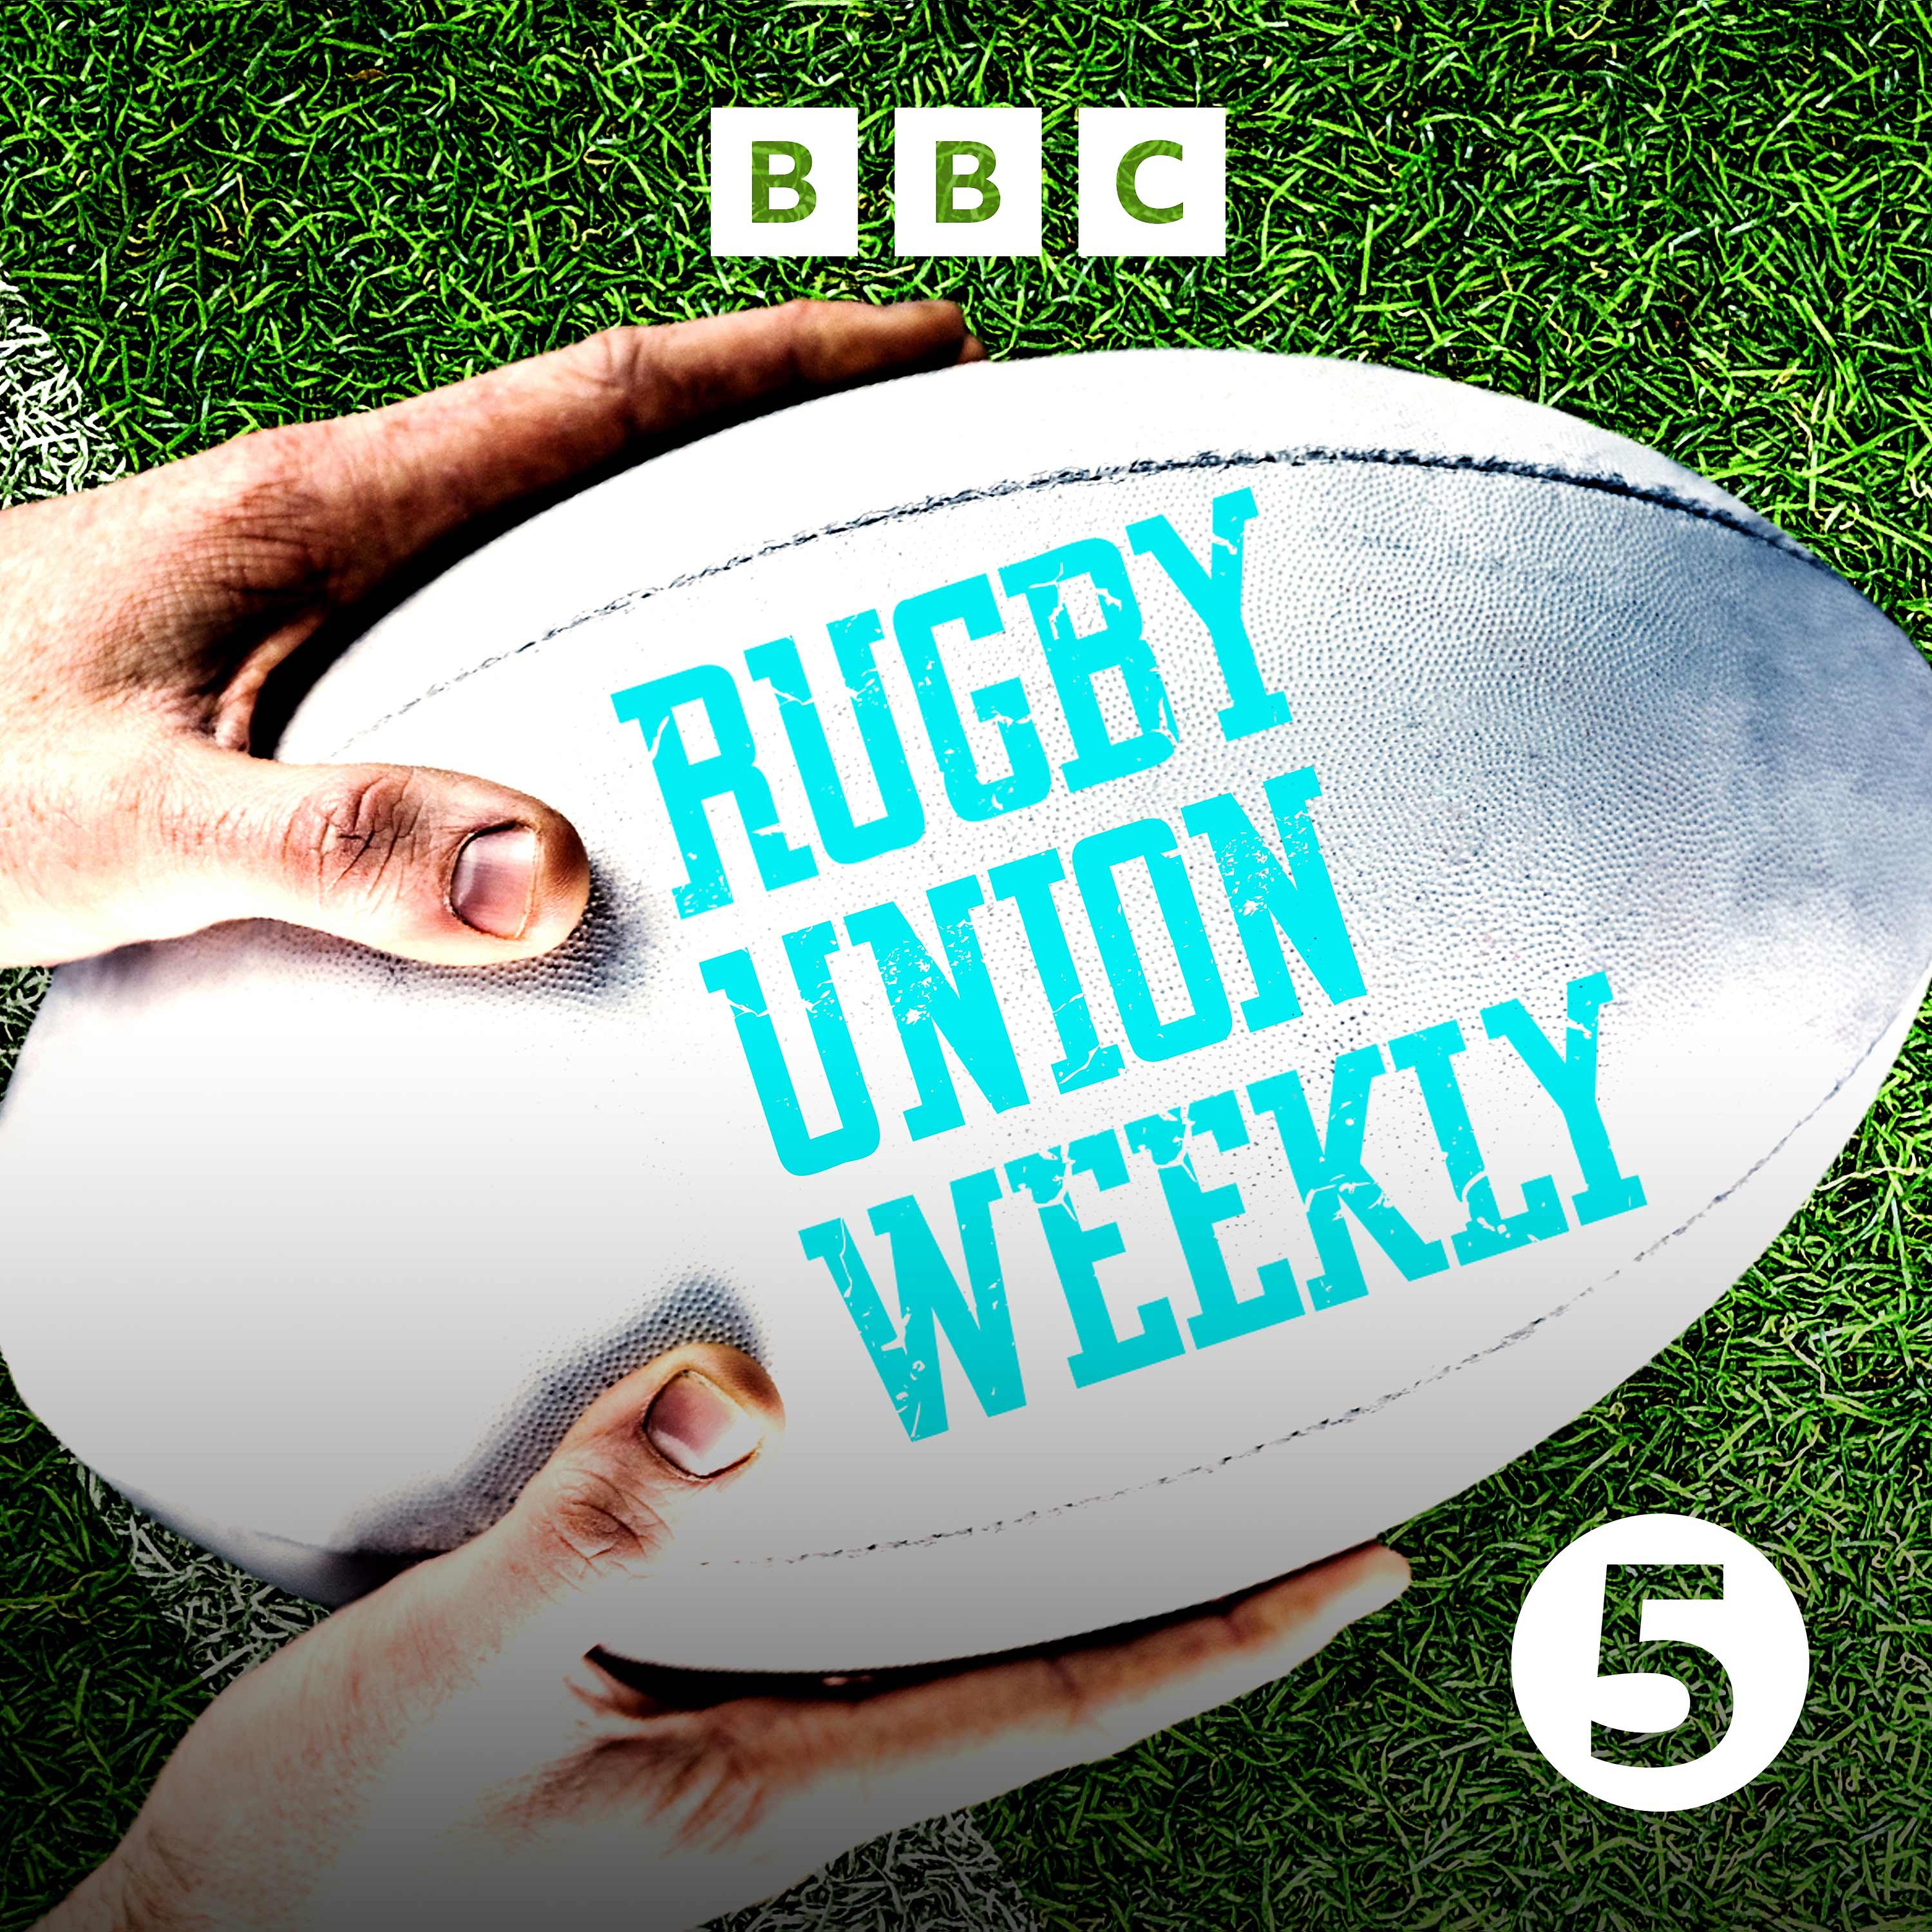 Rugby Union Weekly - Podcast App Links and Website